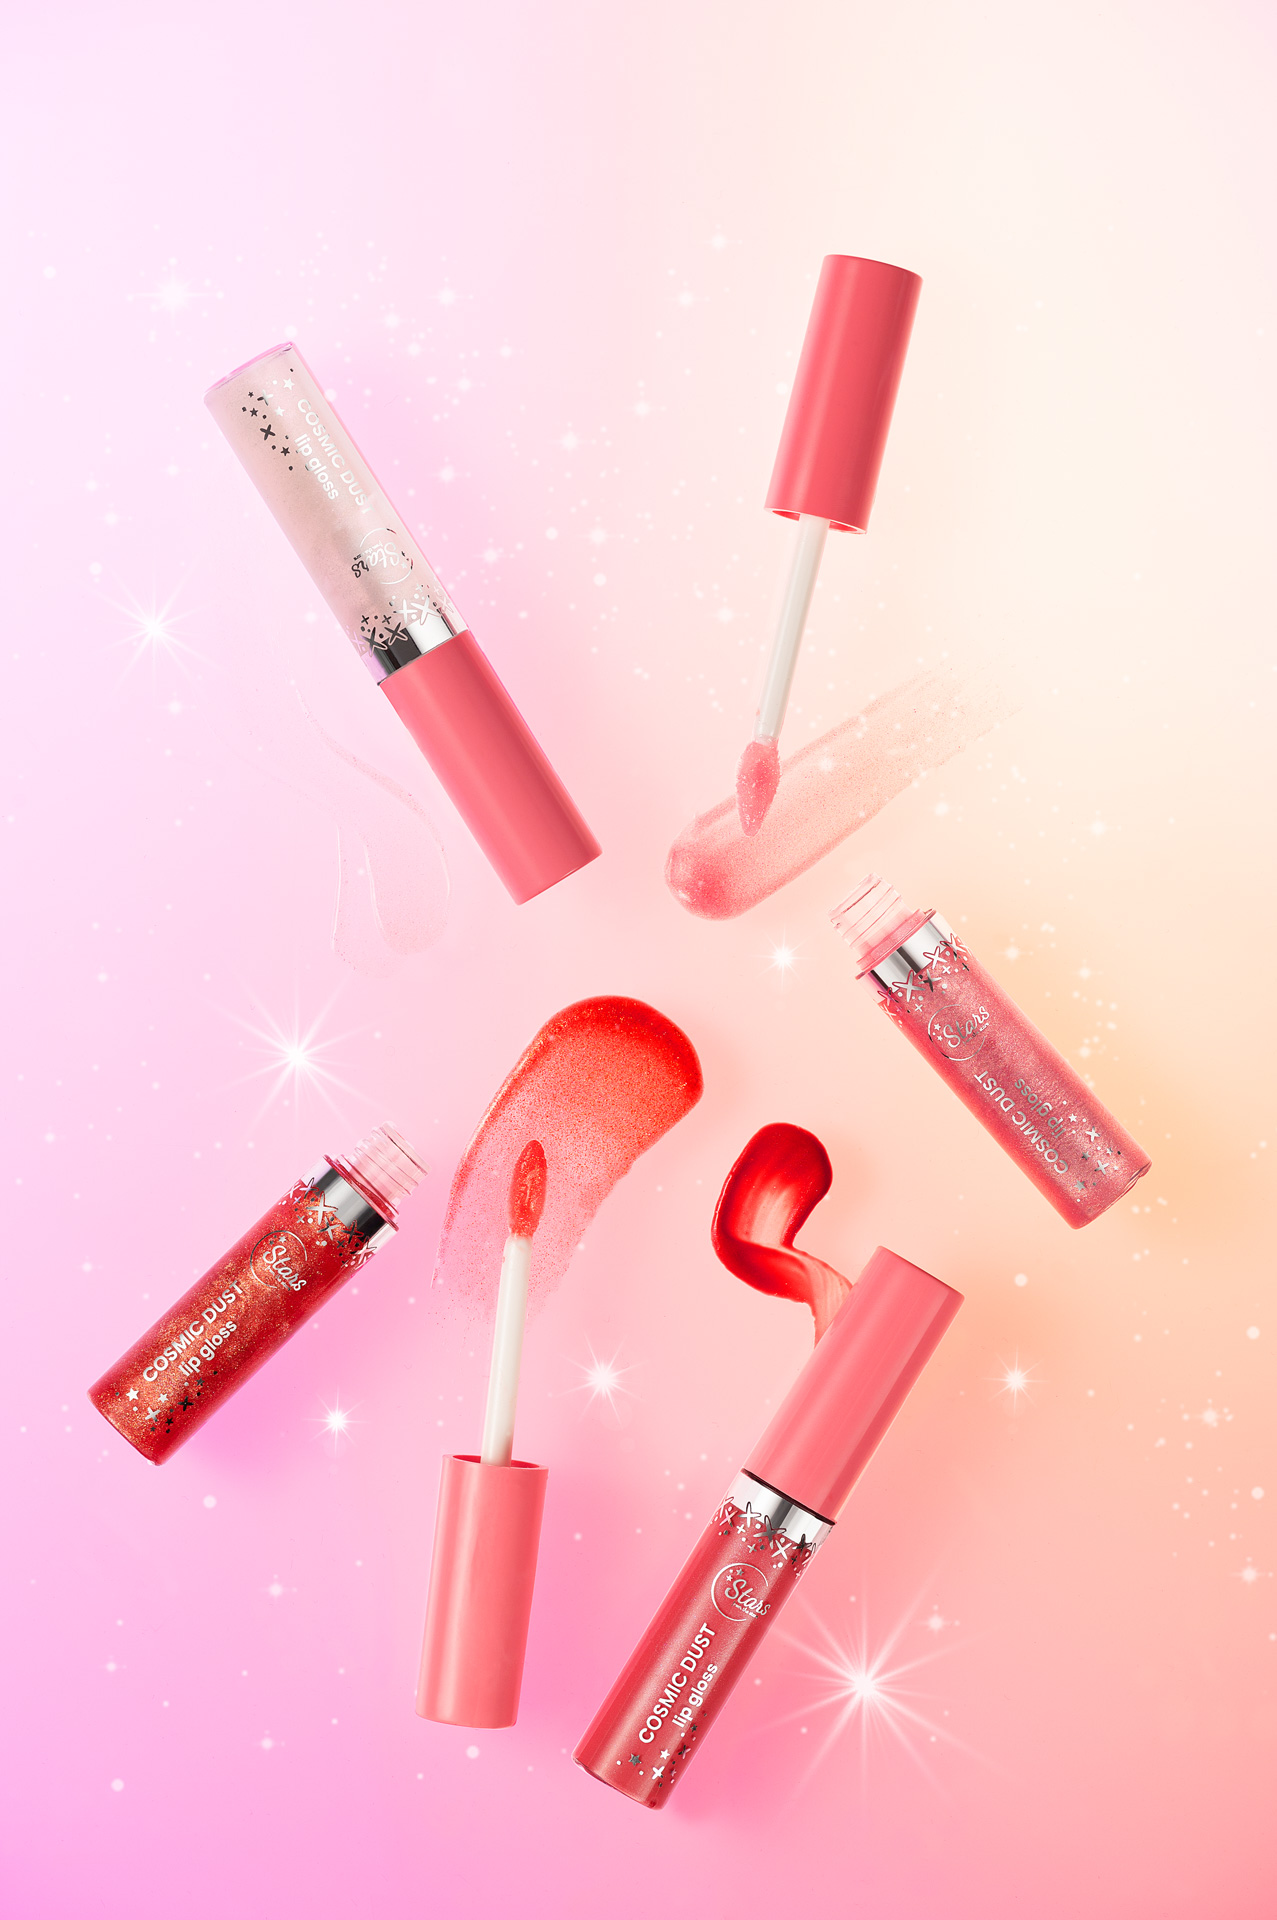 Stylized photography of lip gloss brand with swatches